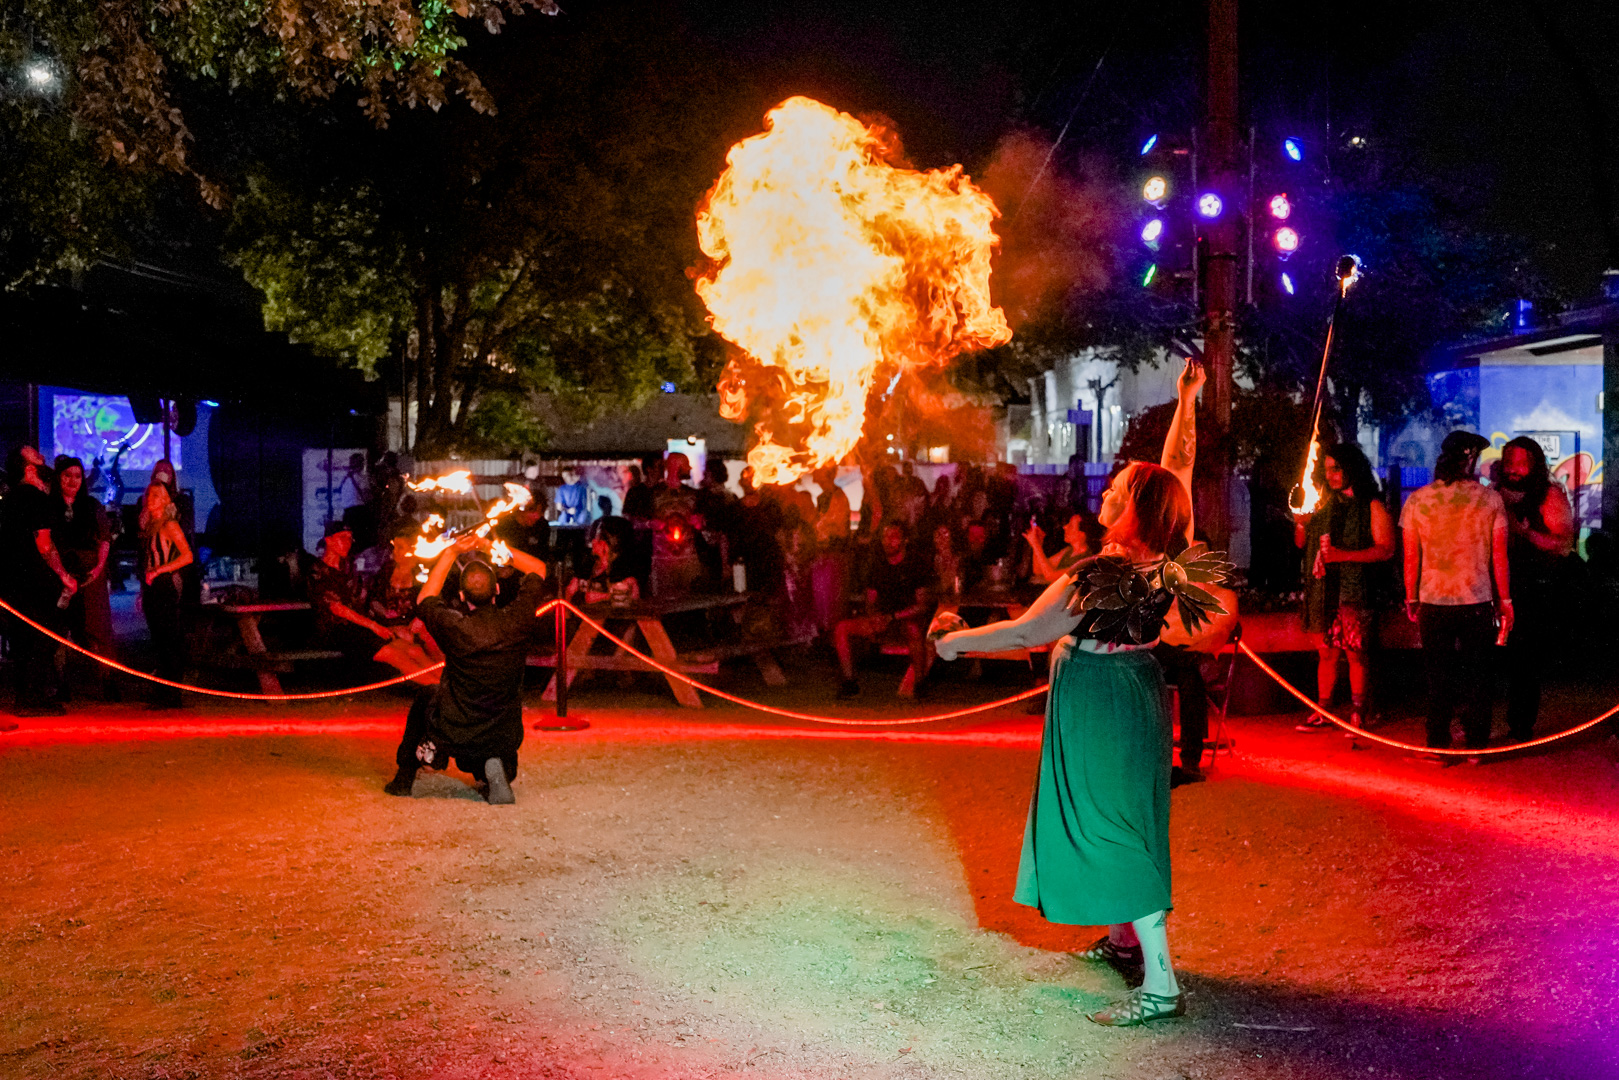 A woman blows fire in front of a crowd outdoors